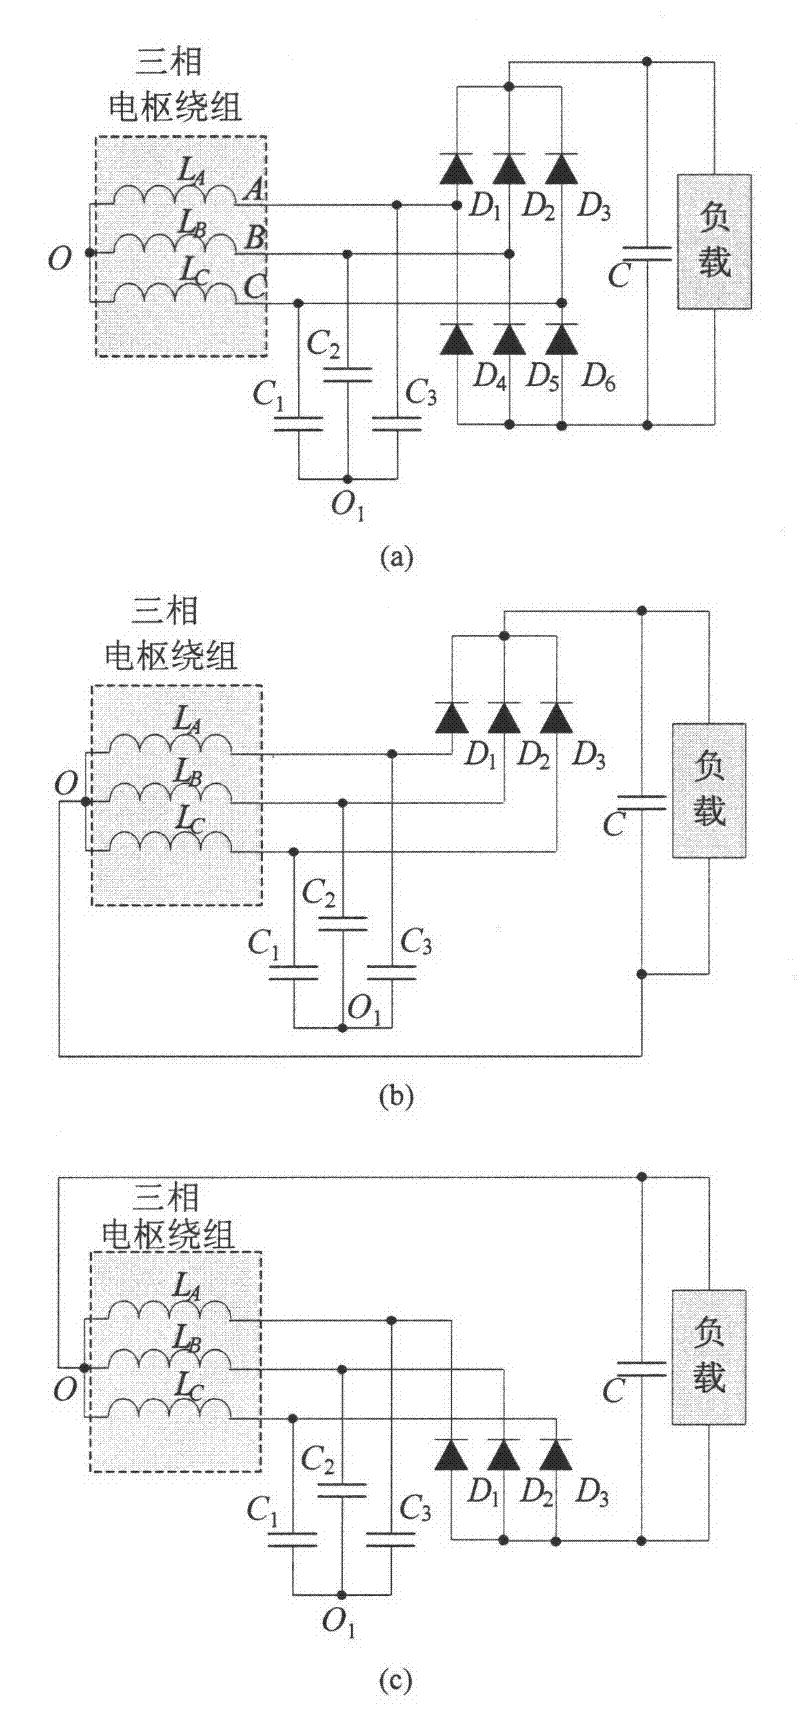 Capacitance compensation circuit structure applied to doubly salient DC generator